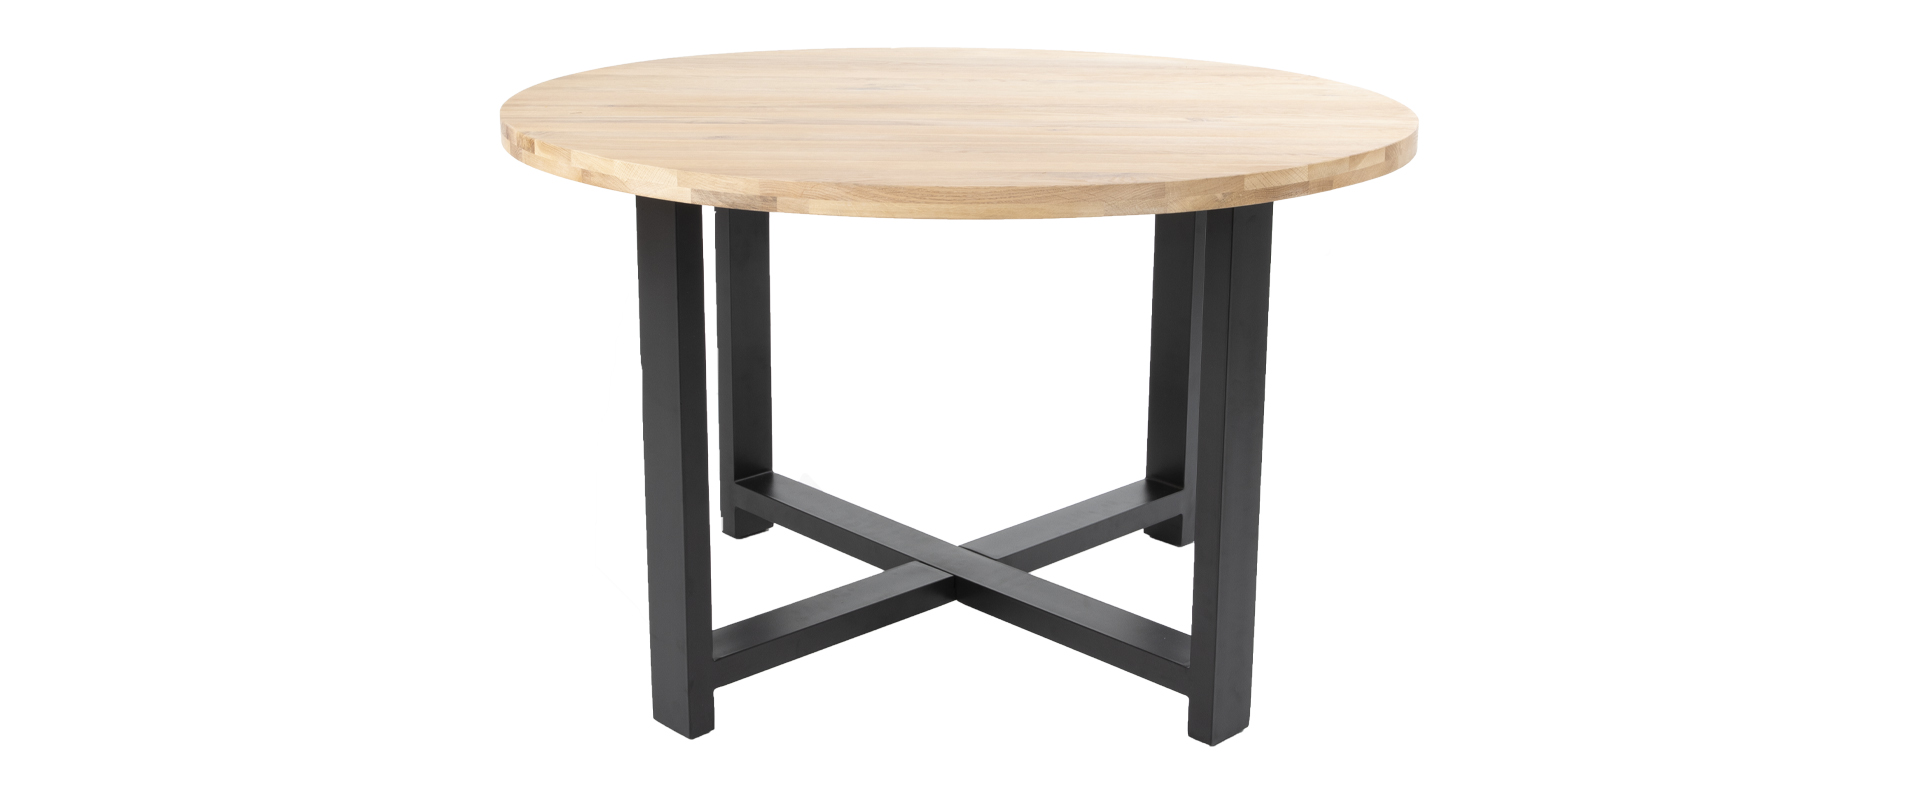 Round Oval Extending Dining Tables Ez Living Interiors